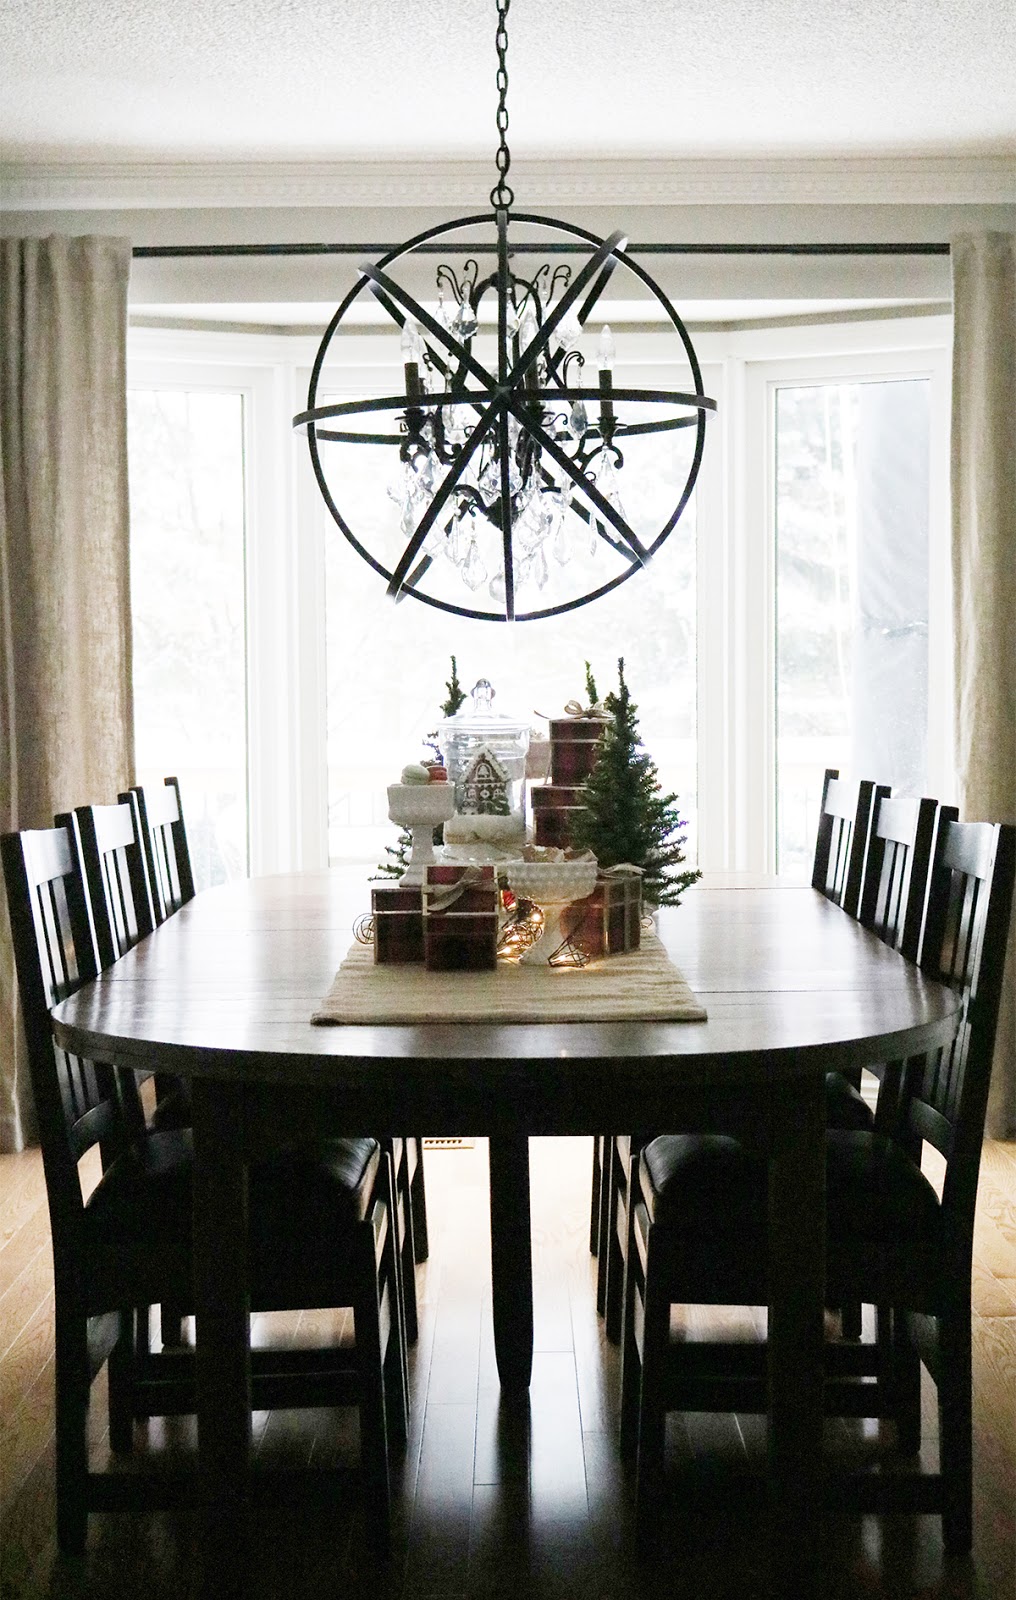 home for the holidays - set up a sweet table | Lorrie Everitt Studio